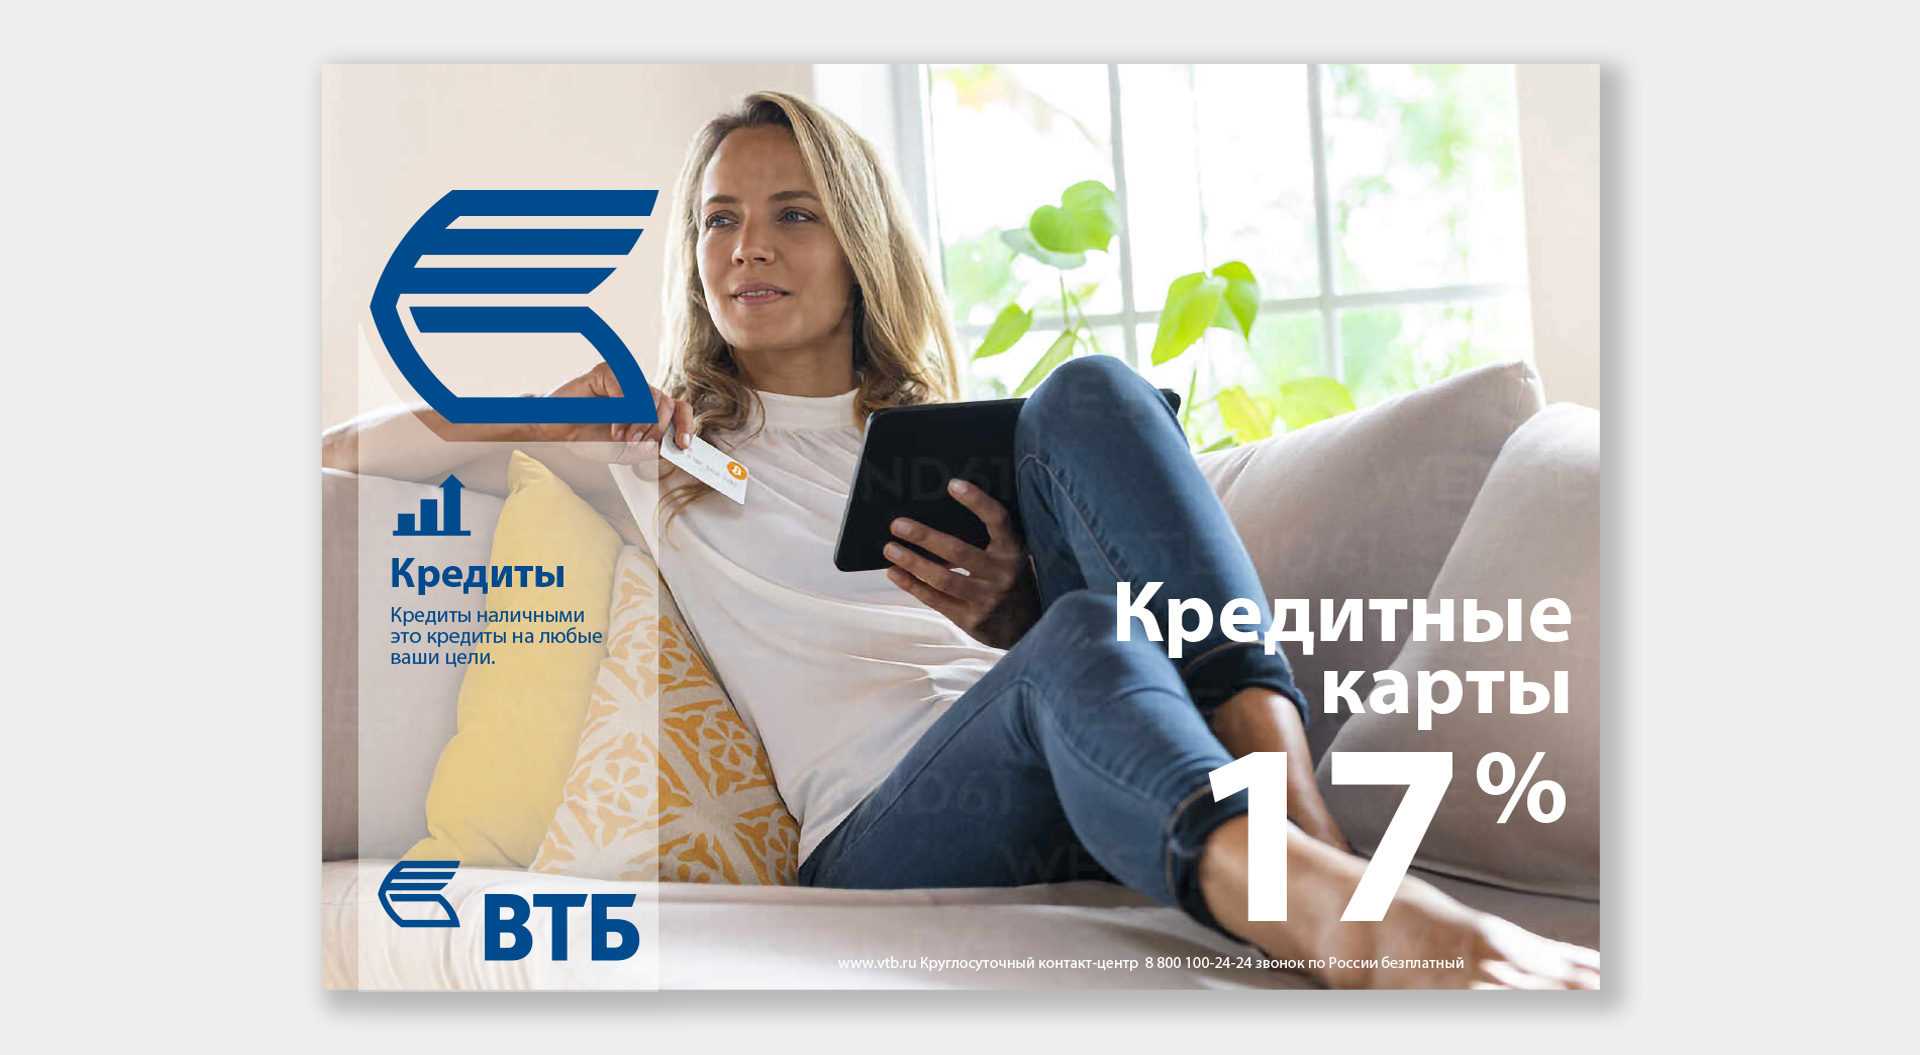 VTB Bank express branch and advertising communications